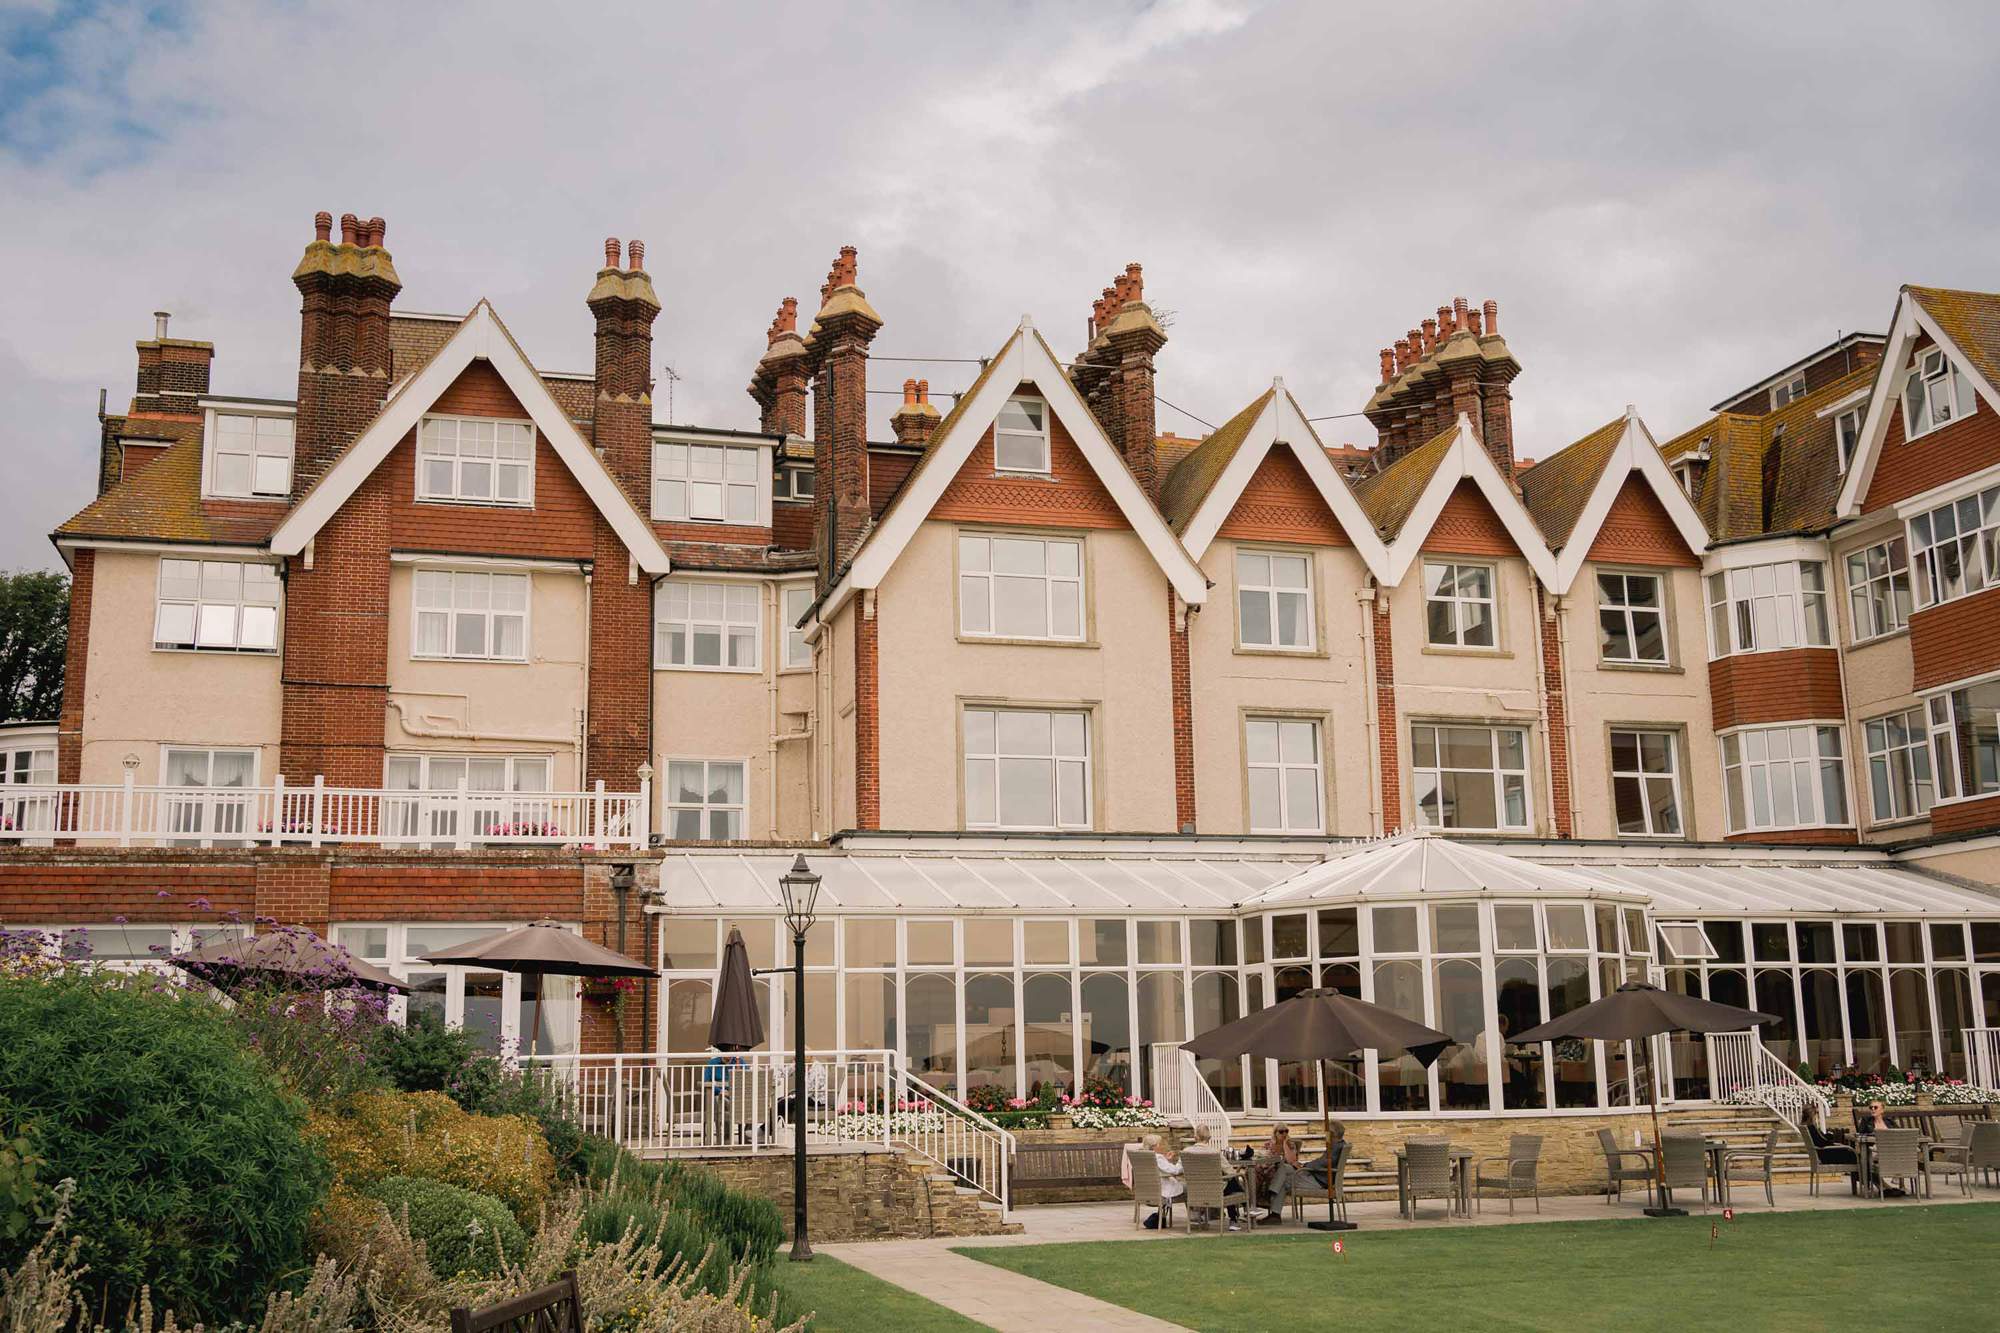 The Hydro Hotel Wedding Venue in Eastbourne